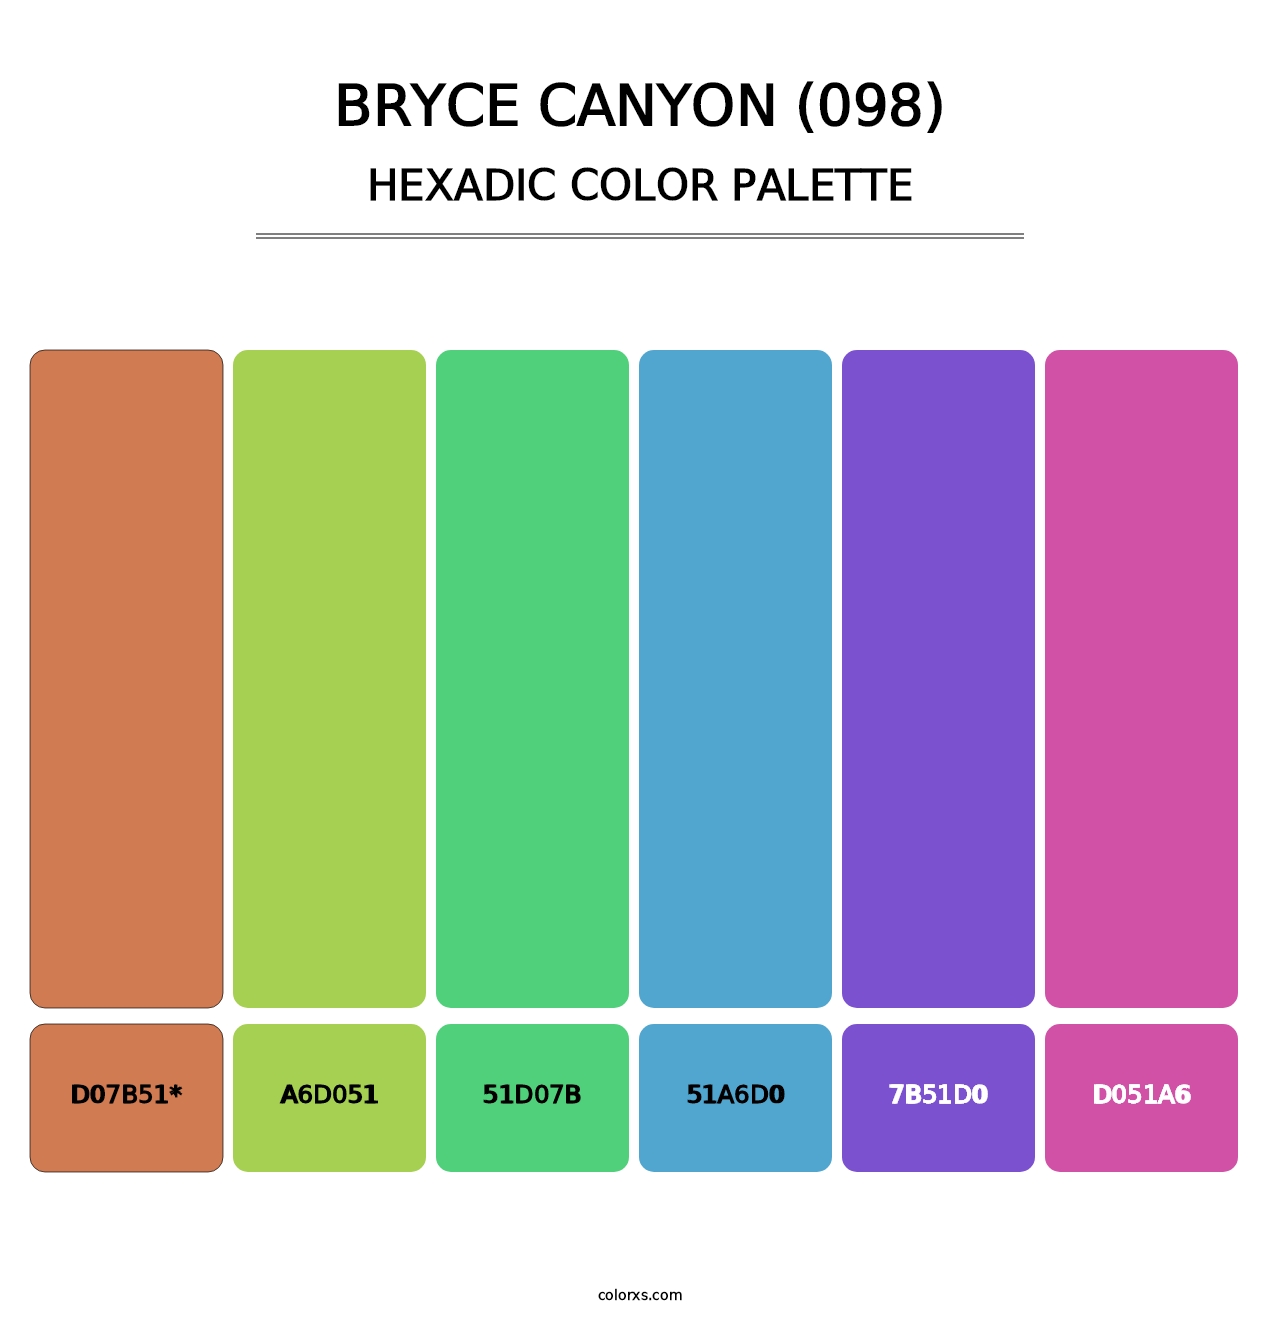 Bryce Canyon (098) - Hexadic Color Palette